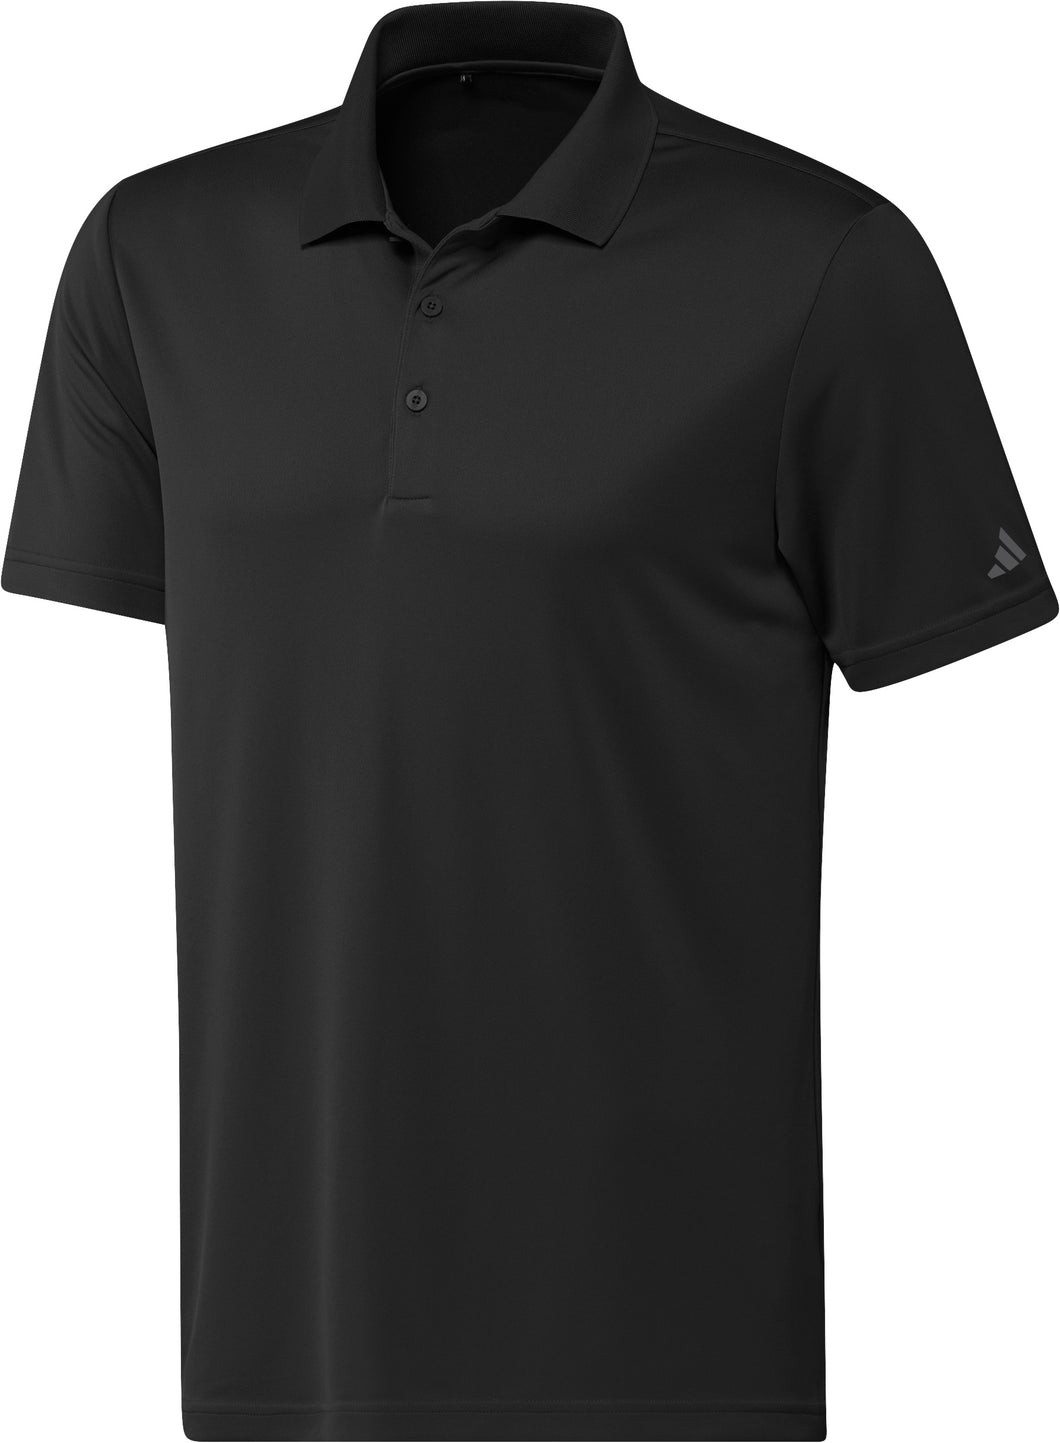 Men's Solid Performance Polo (5 Colors)